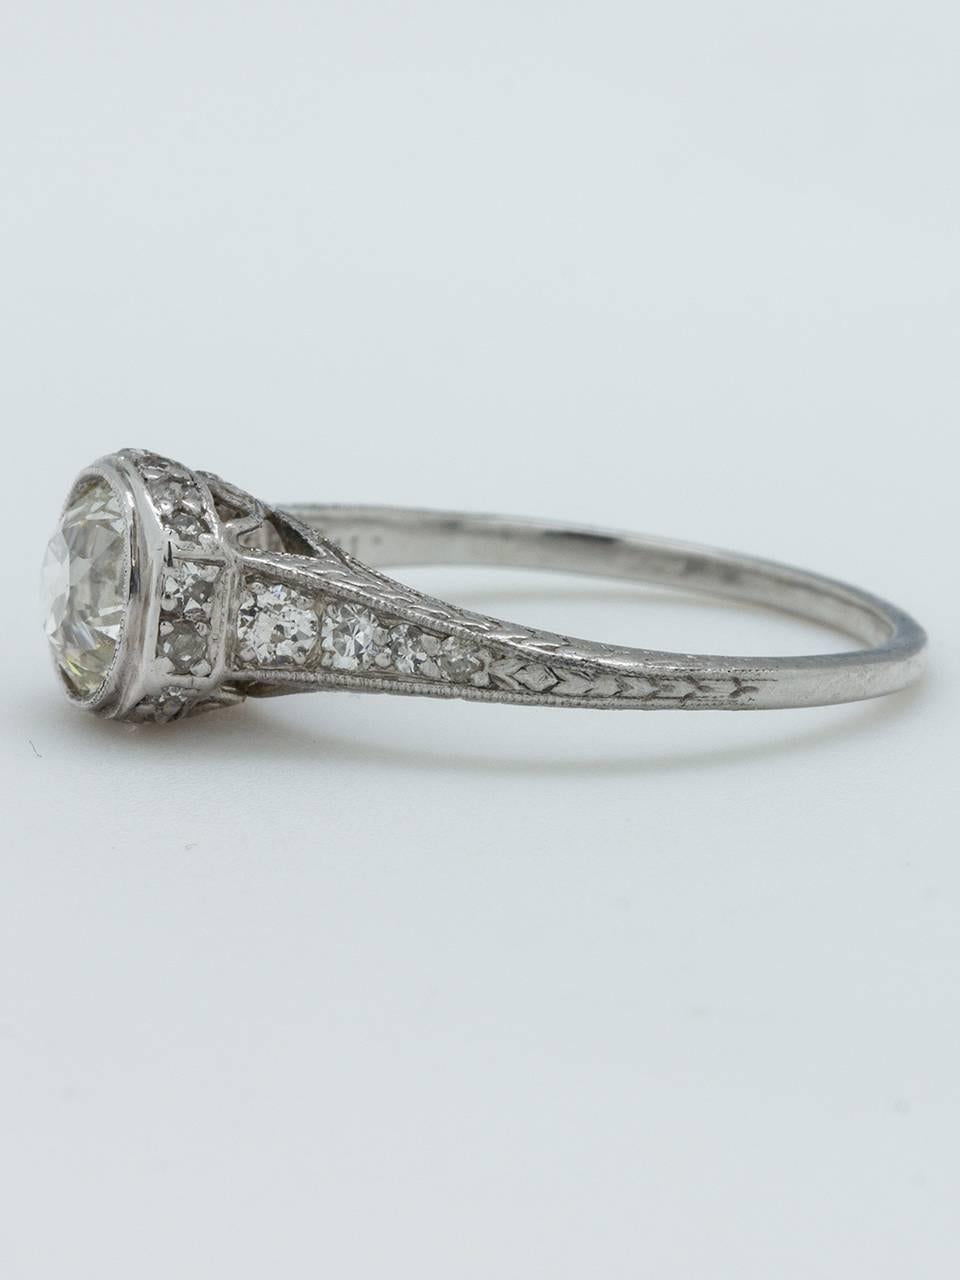 This beautifully crafted 1920s platinum engagement ring features a stunning EGL certified 0.93 carat Old European cut diamond, J-VS2. The elevated bezel setting is adorned with intricately executed wheat pattern engraving and tiny bead set side